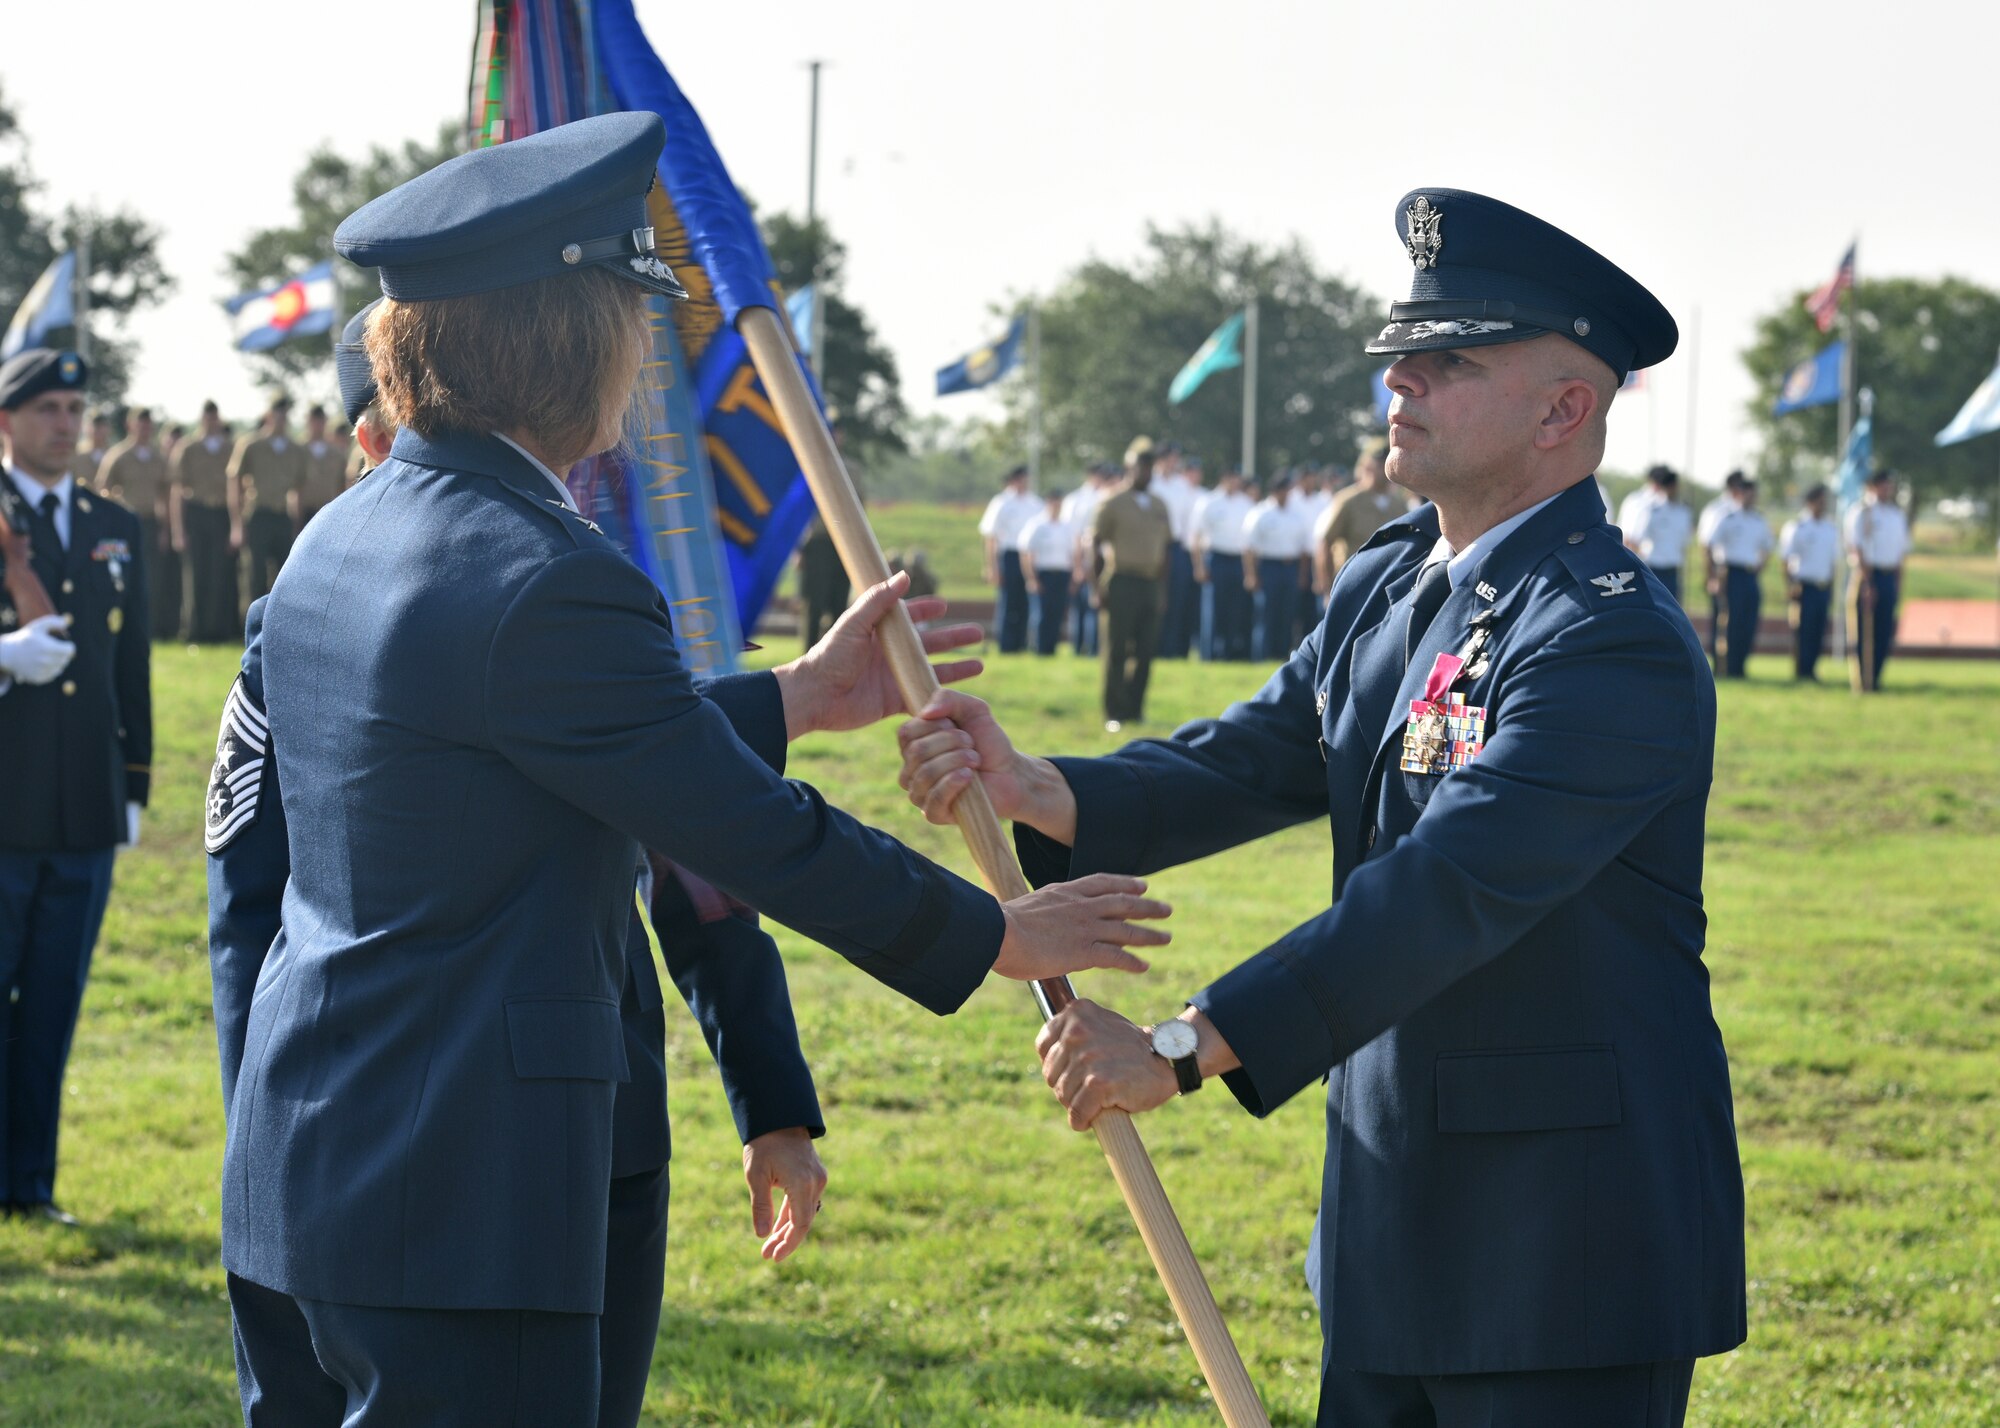 U.S. Air Force Col. Andres Nazario, 17th Training Wing outgoing commander, relinquishes command to Maj. Gen. Andrea Tullos, Second Air Force commander, during the 17th TRW change of command ceremony on Goodfellow Air Force Base, Texas, July 13, 2021. During his time here, Nazario created The Goodfellow Way, a new strategic approach fueled by vision, leadership and energy to improve the way of life for the Goodfellow community.  (U.S. Air Force photo by Senior Airman Ashley Thrash)